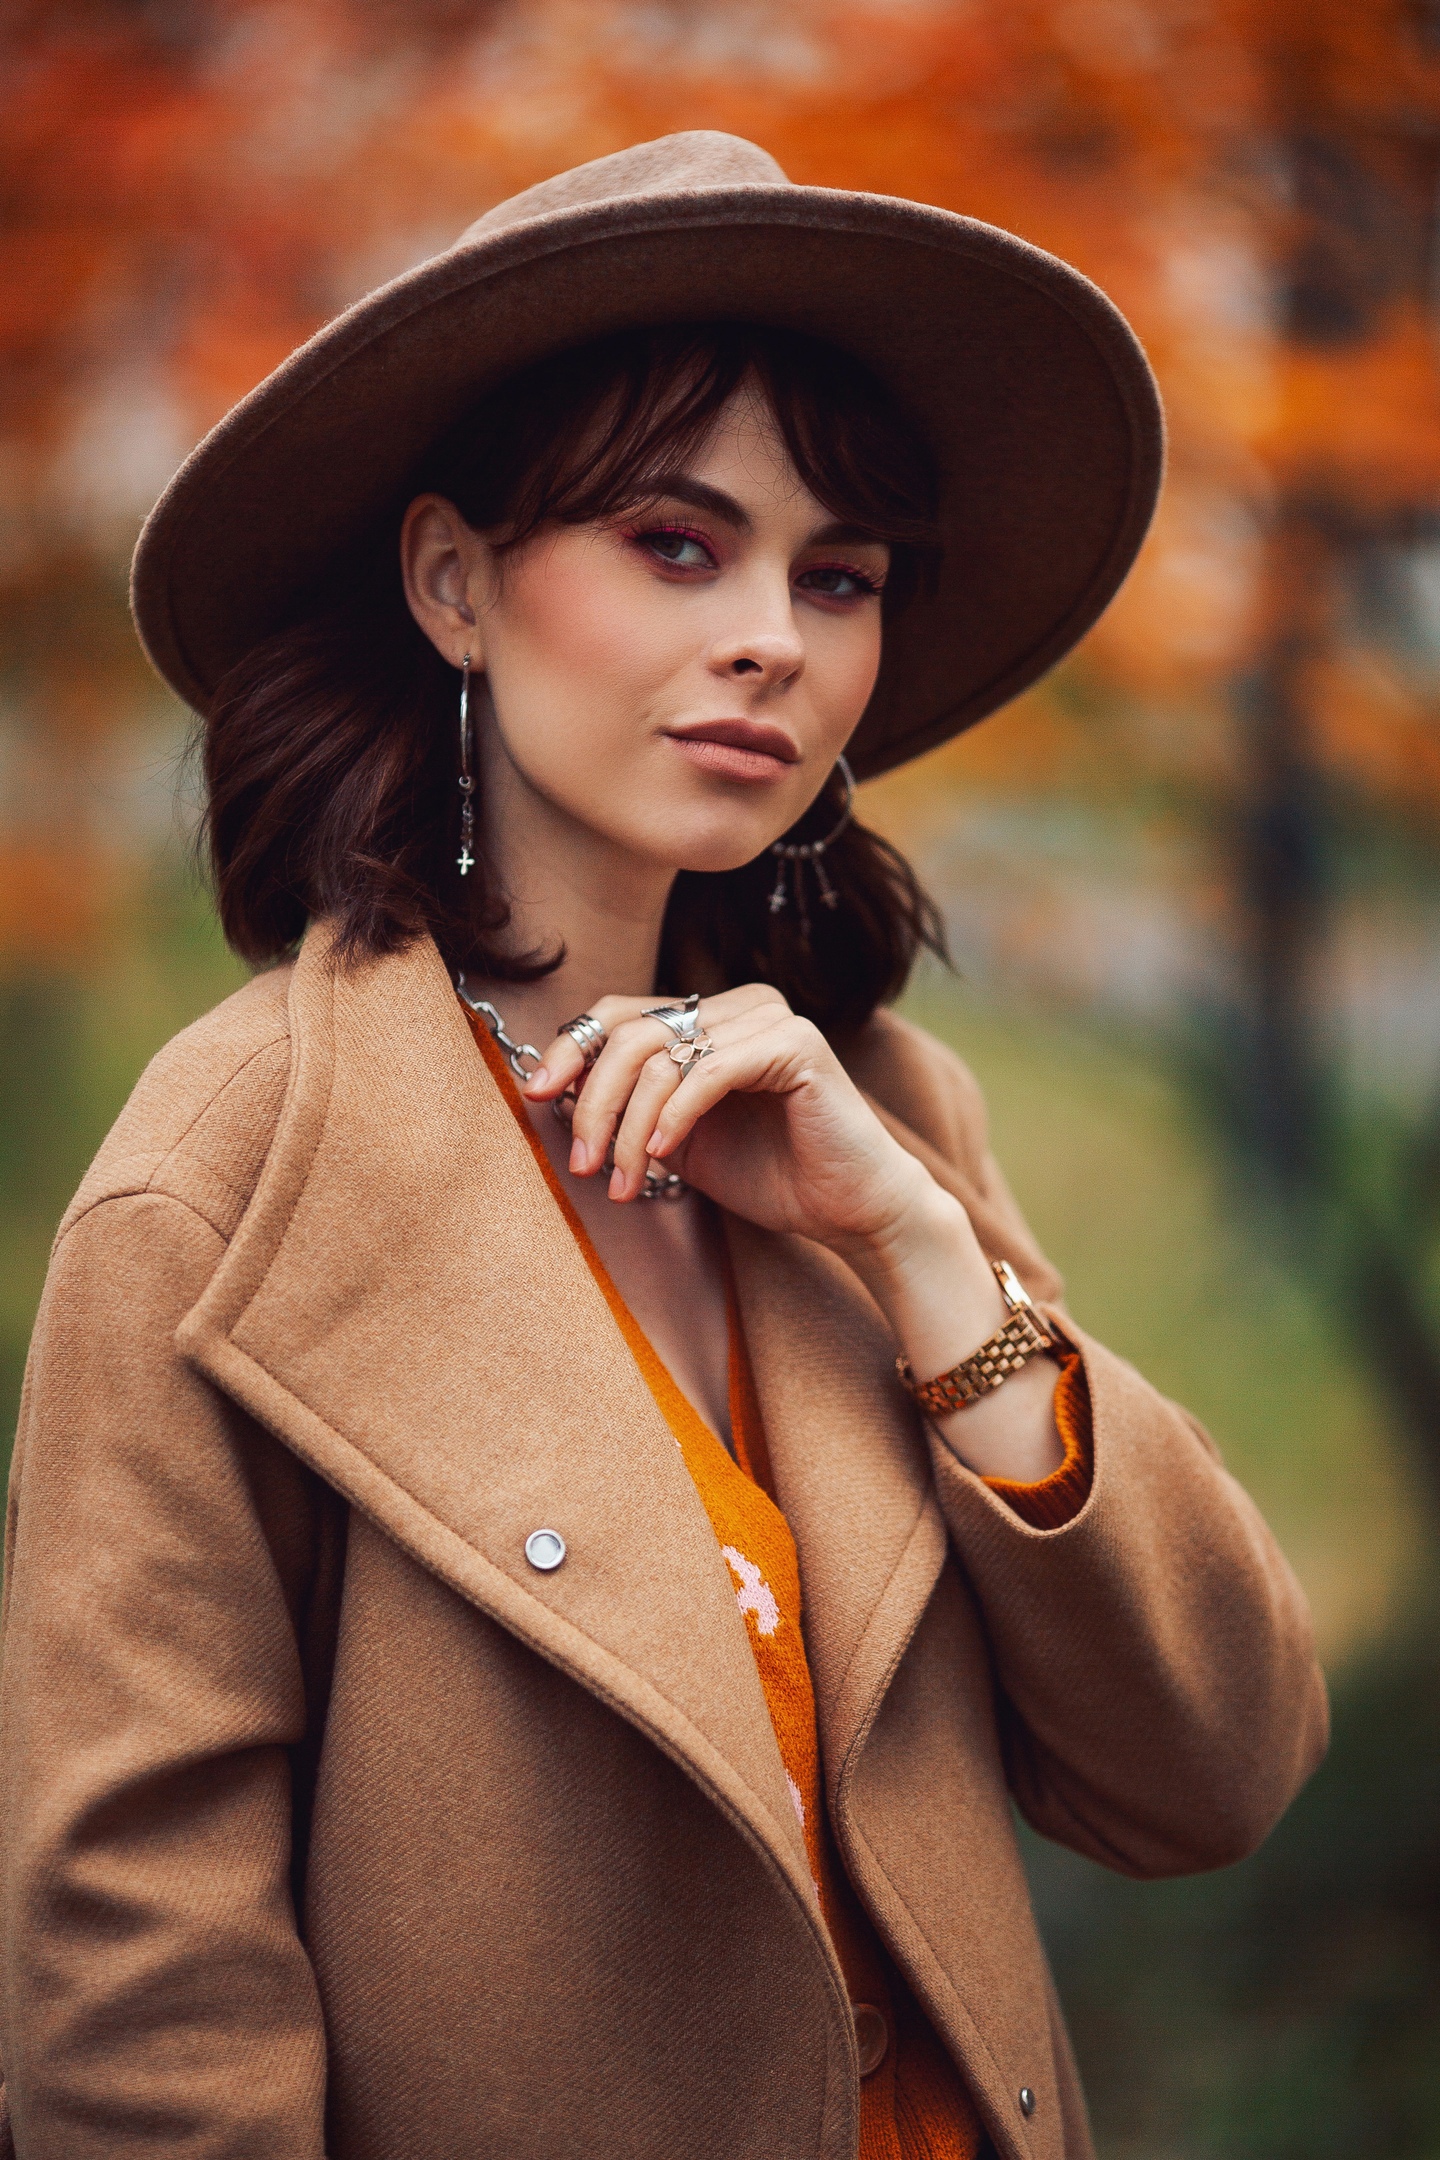 stylish personal photoshoot autumn woman in hat